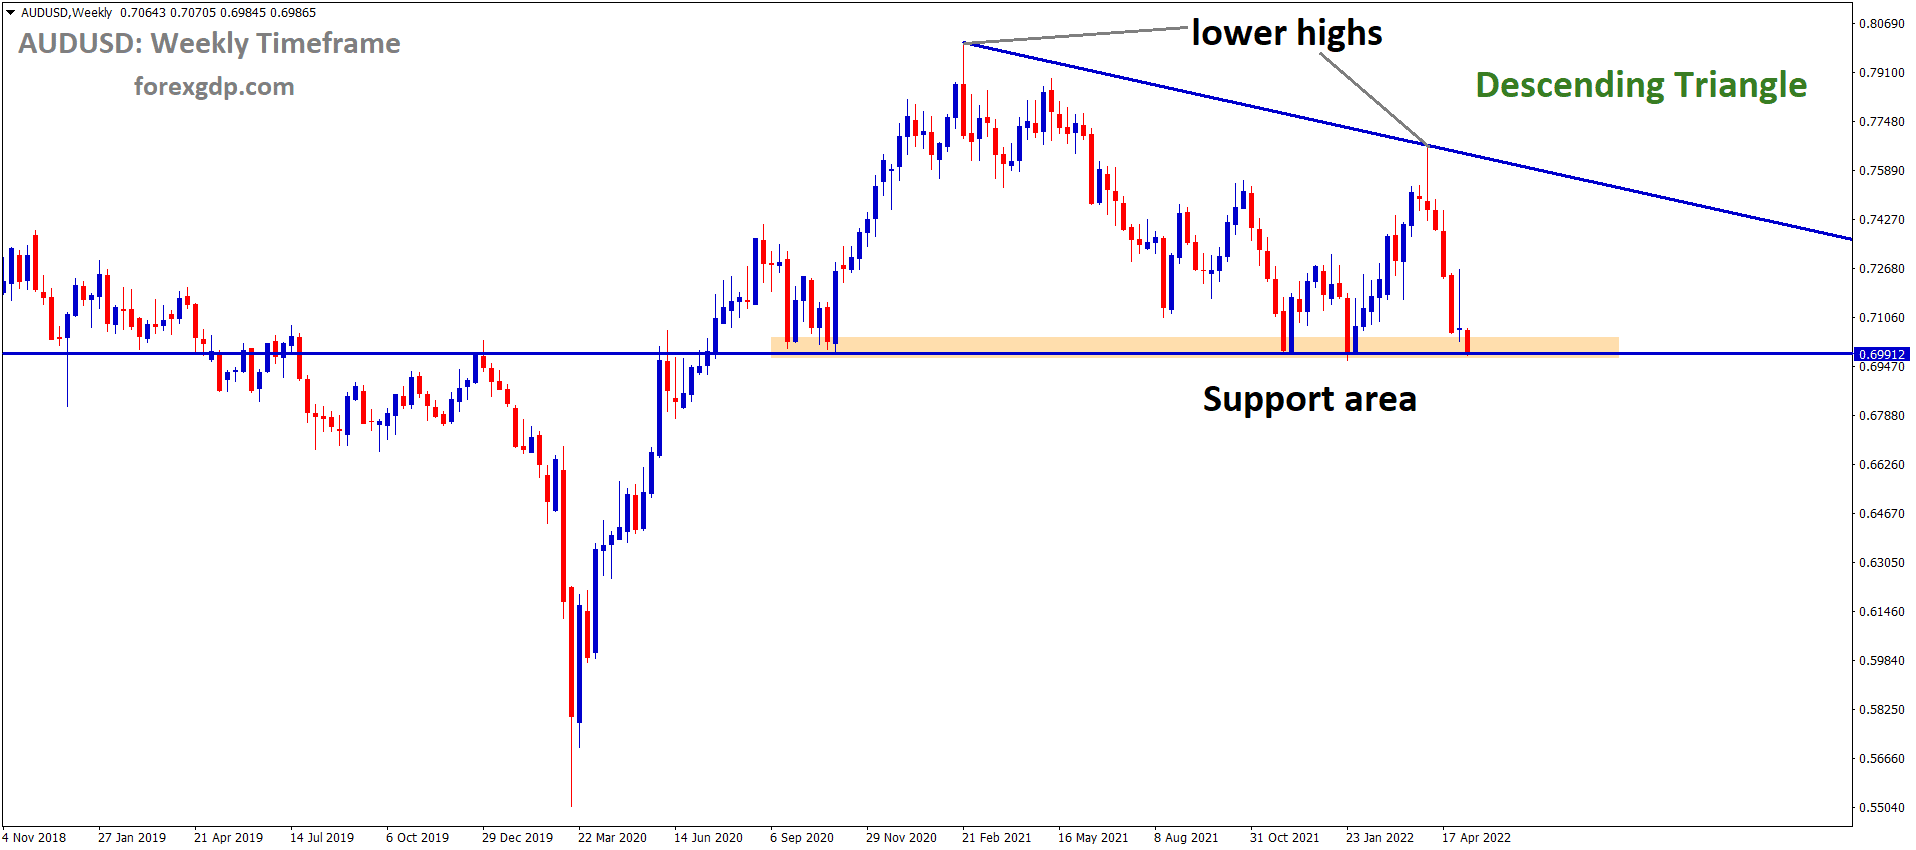 AUDUSD Weekly Time Frame Analysis Market is moving in the Descending triangle pattern and the Market has reached the Horizontal Support area of the Pattern